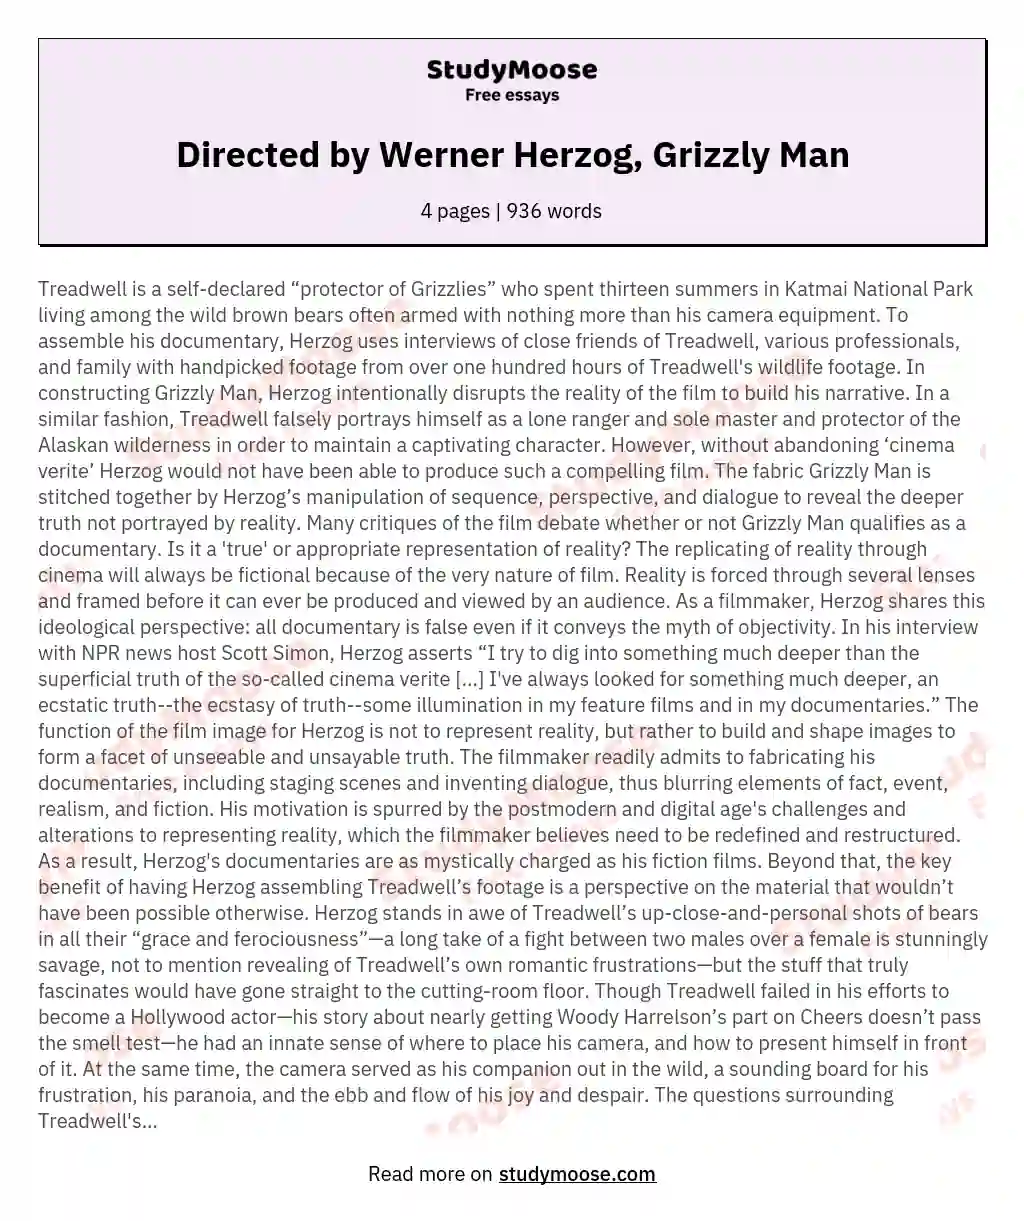 Directed by Werner Herzog, Grizzly Man essay